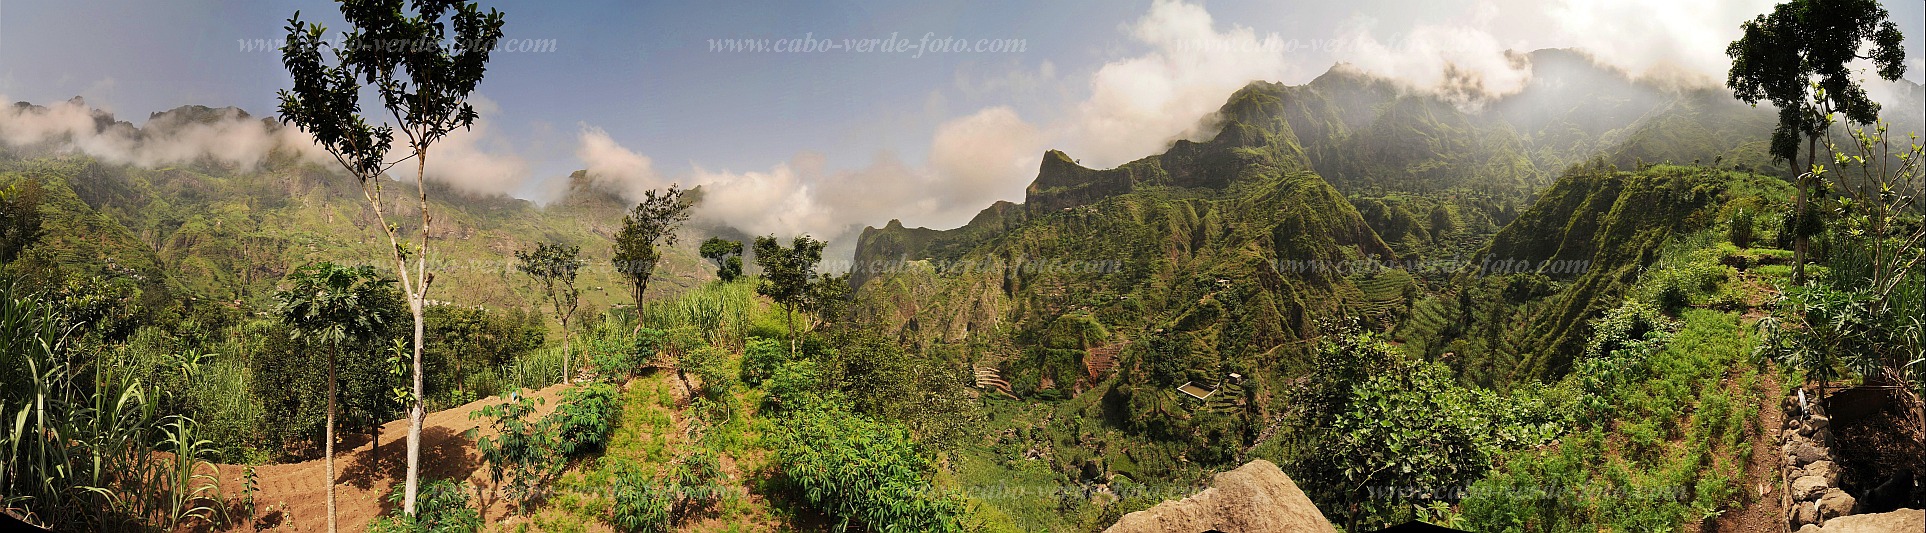 Santo Anto : Paul Ch de Padre : panorama view over Pal valley : Landscape MountainCabo Verde Foto Gallery